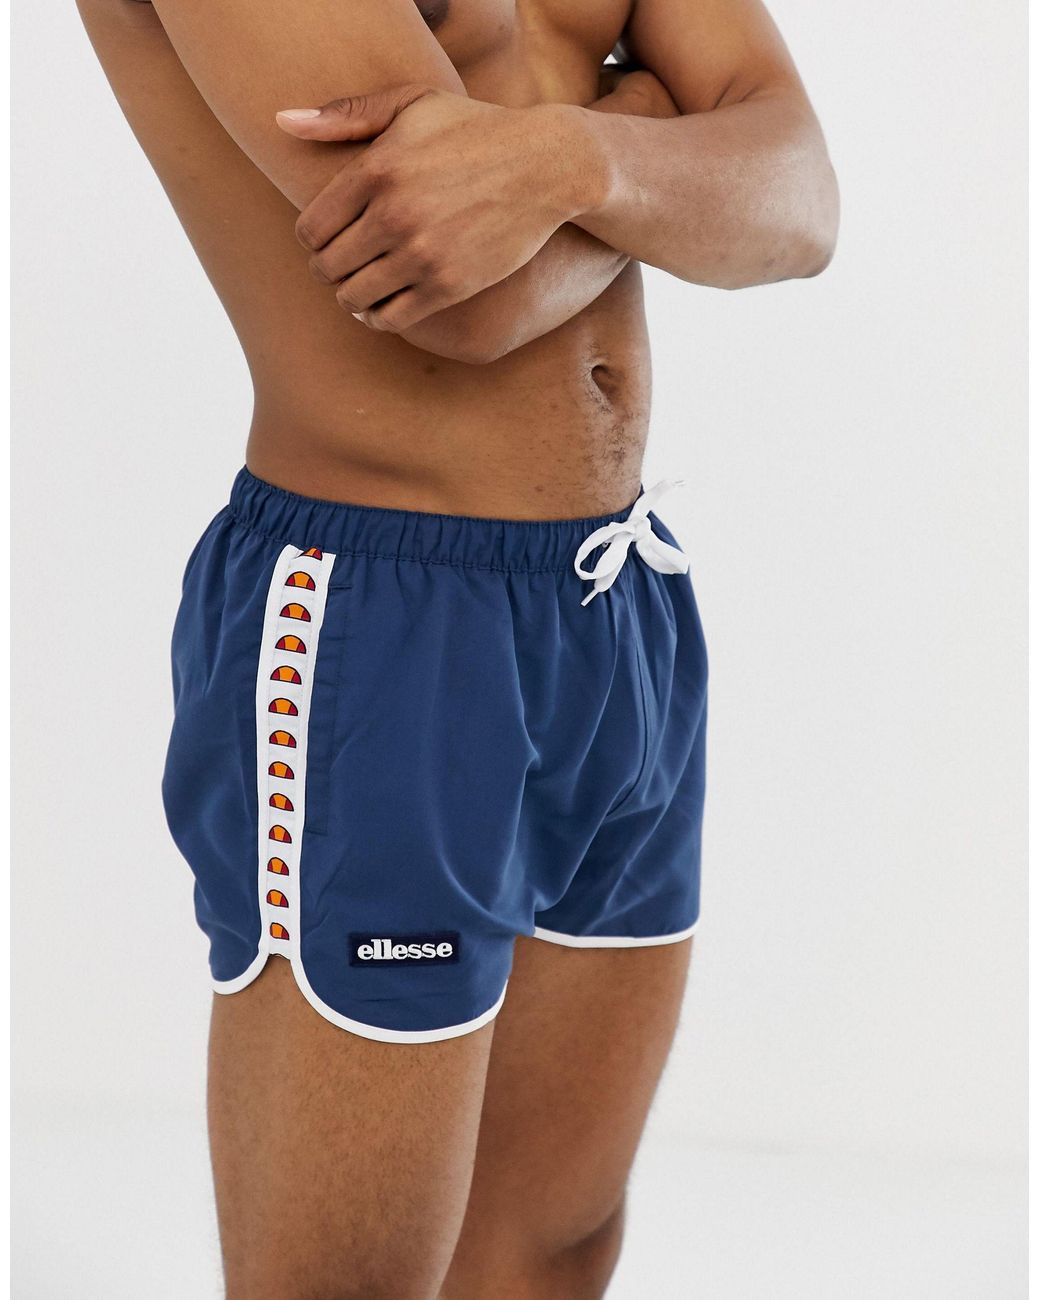 swimmers Ellesse Viale Shorts in Blue beach shorts trunks 